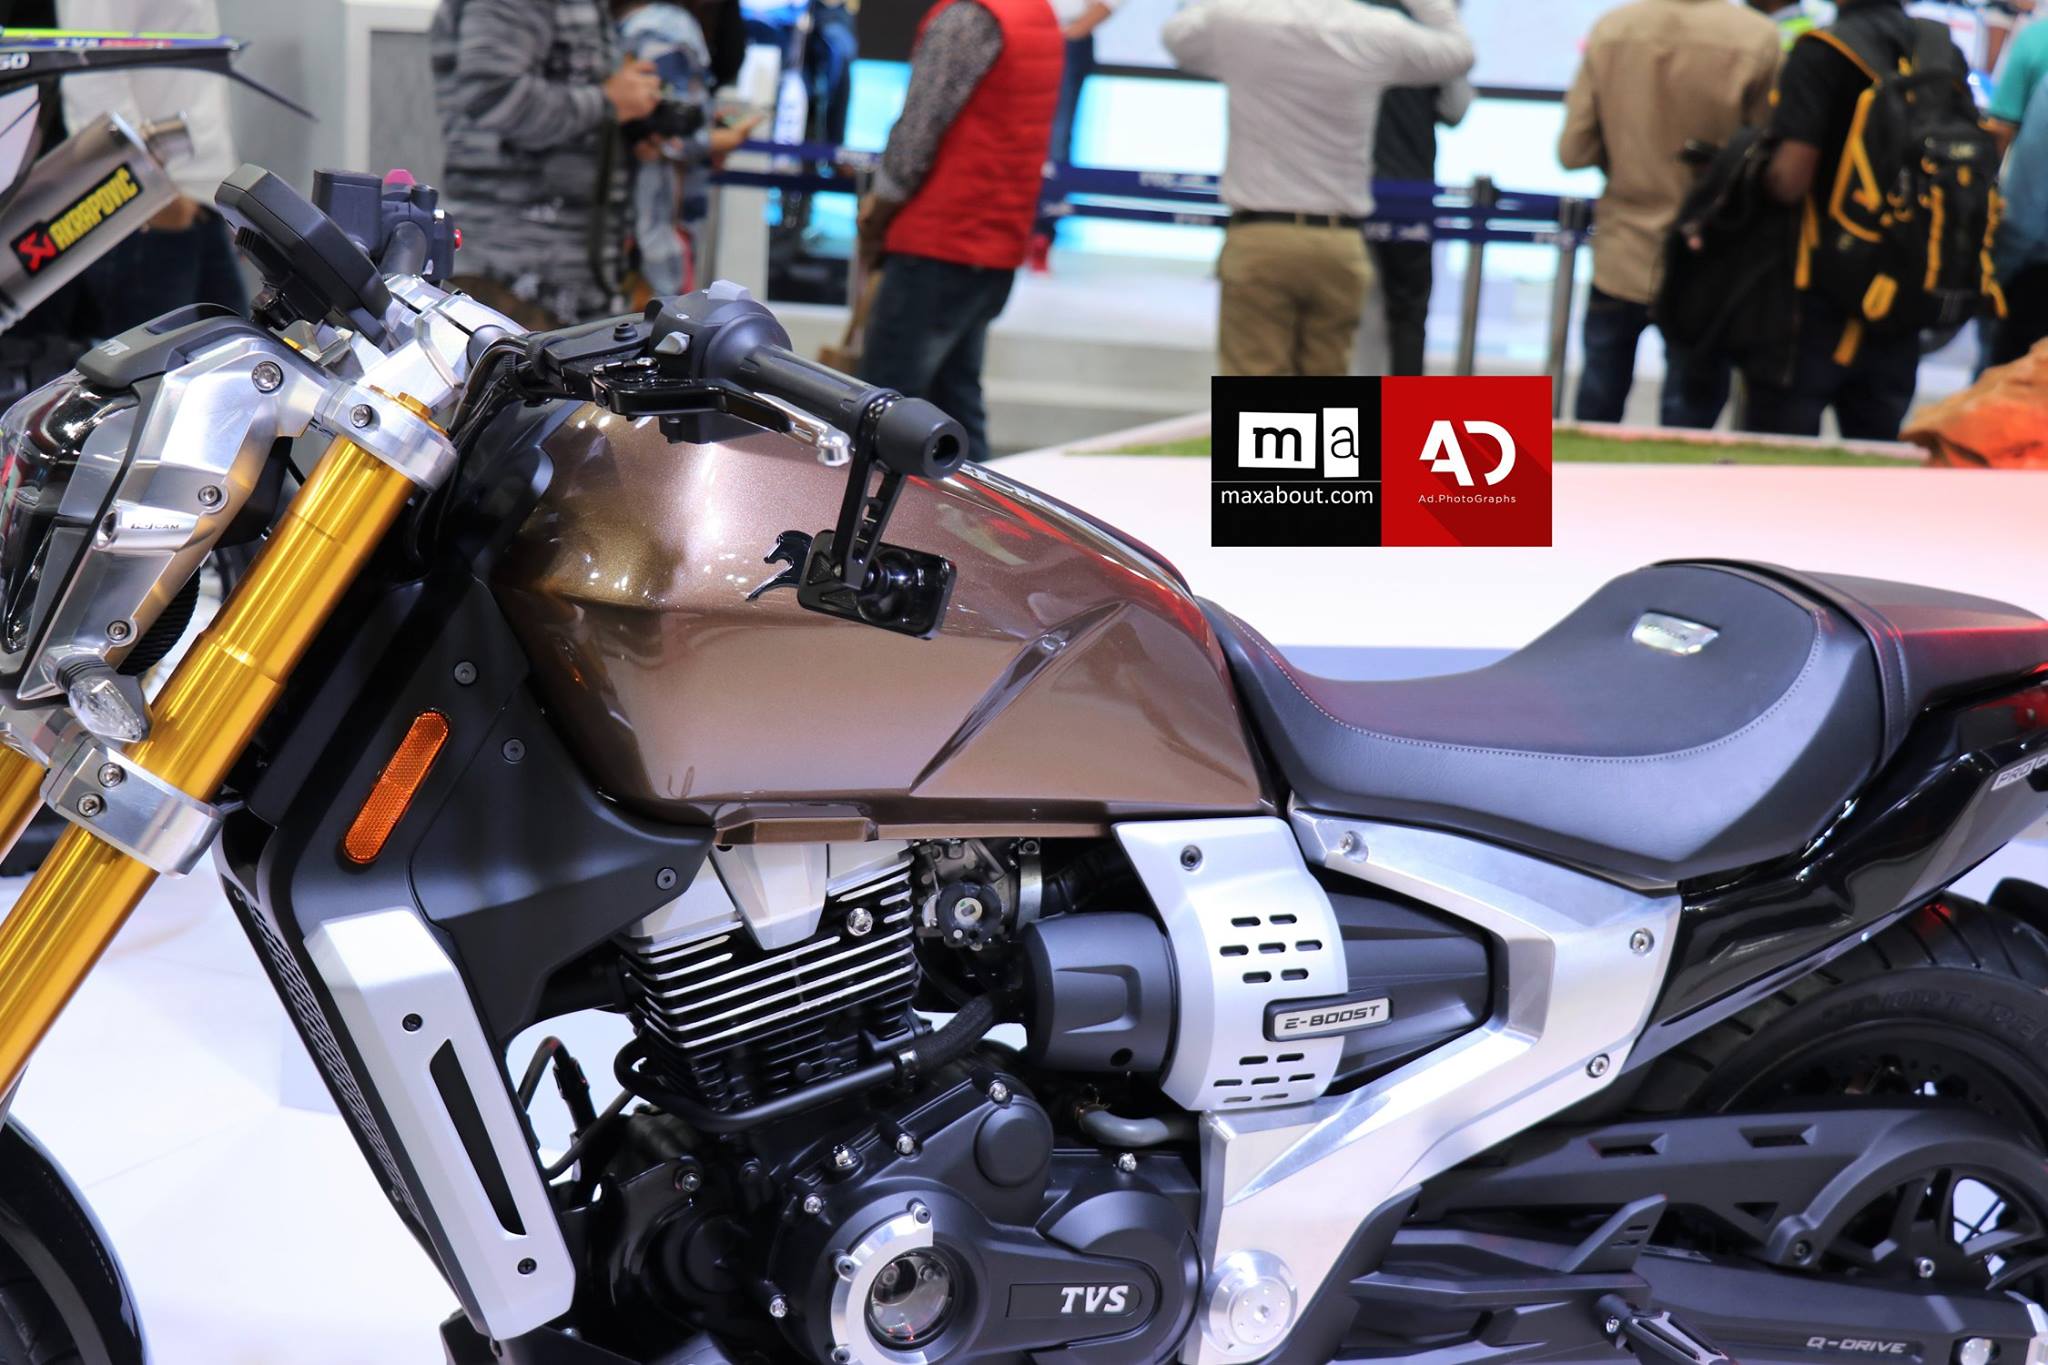 5 Quick Facts About the Upcoming TVS Cruiser Motorcycle - left